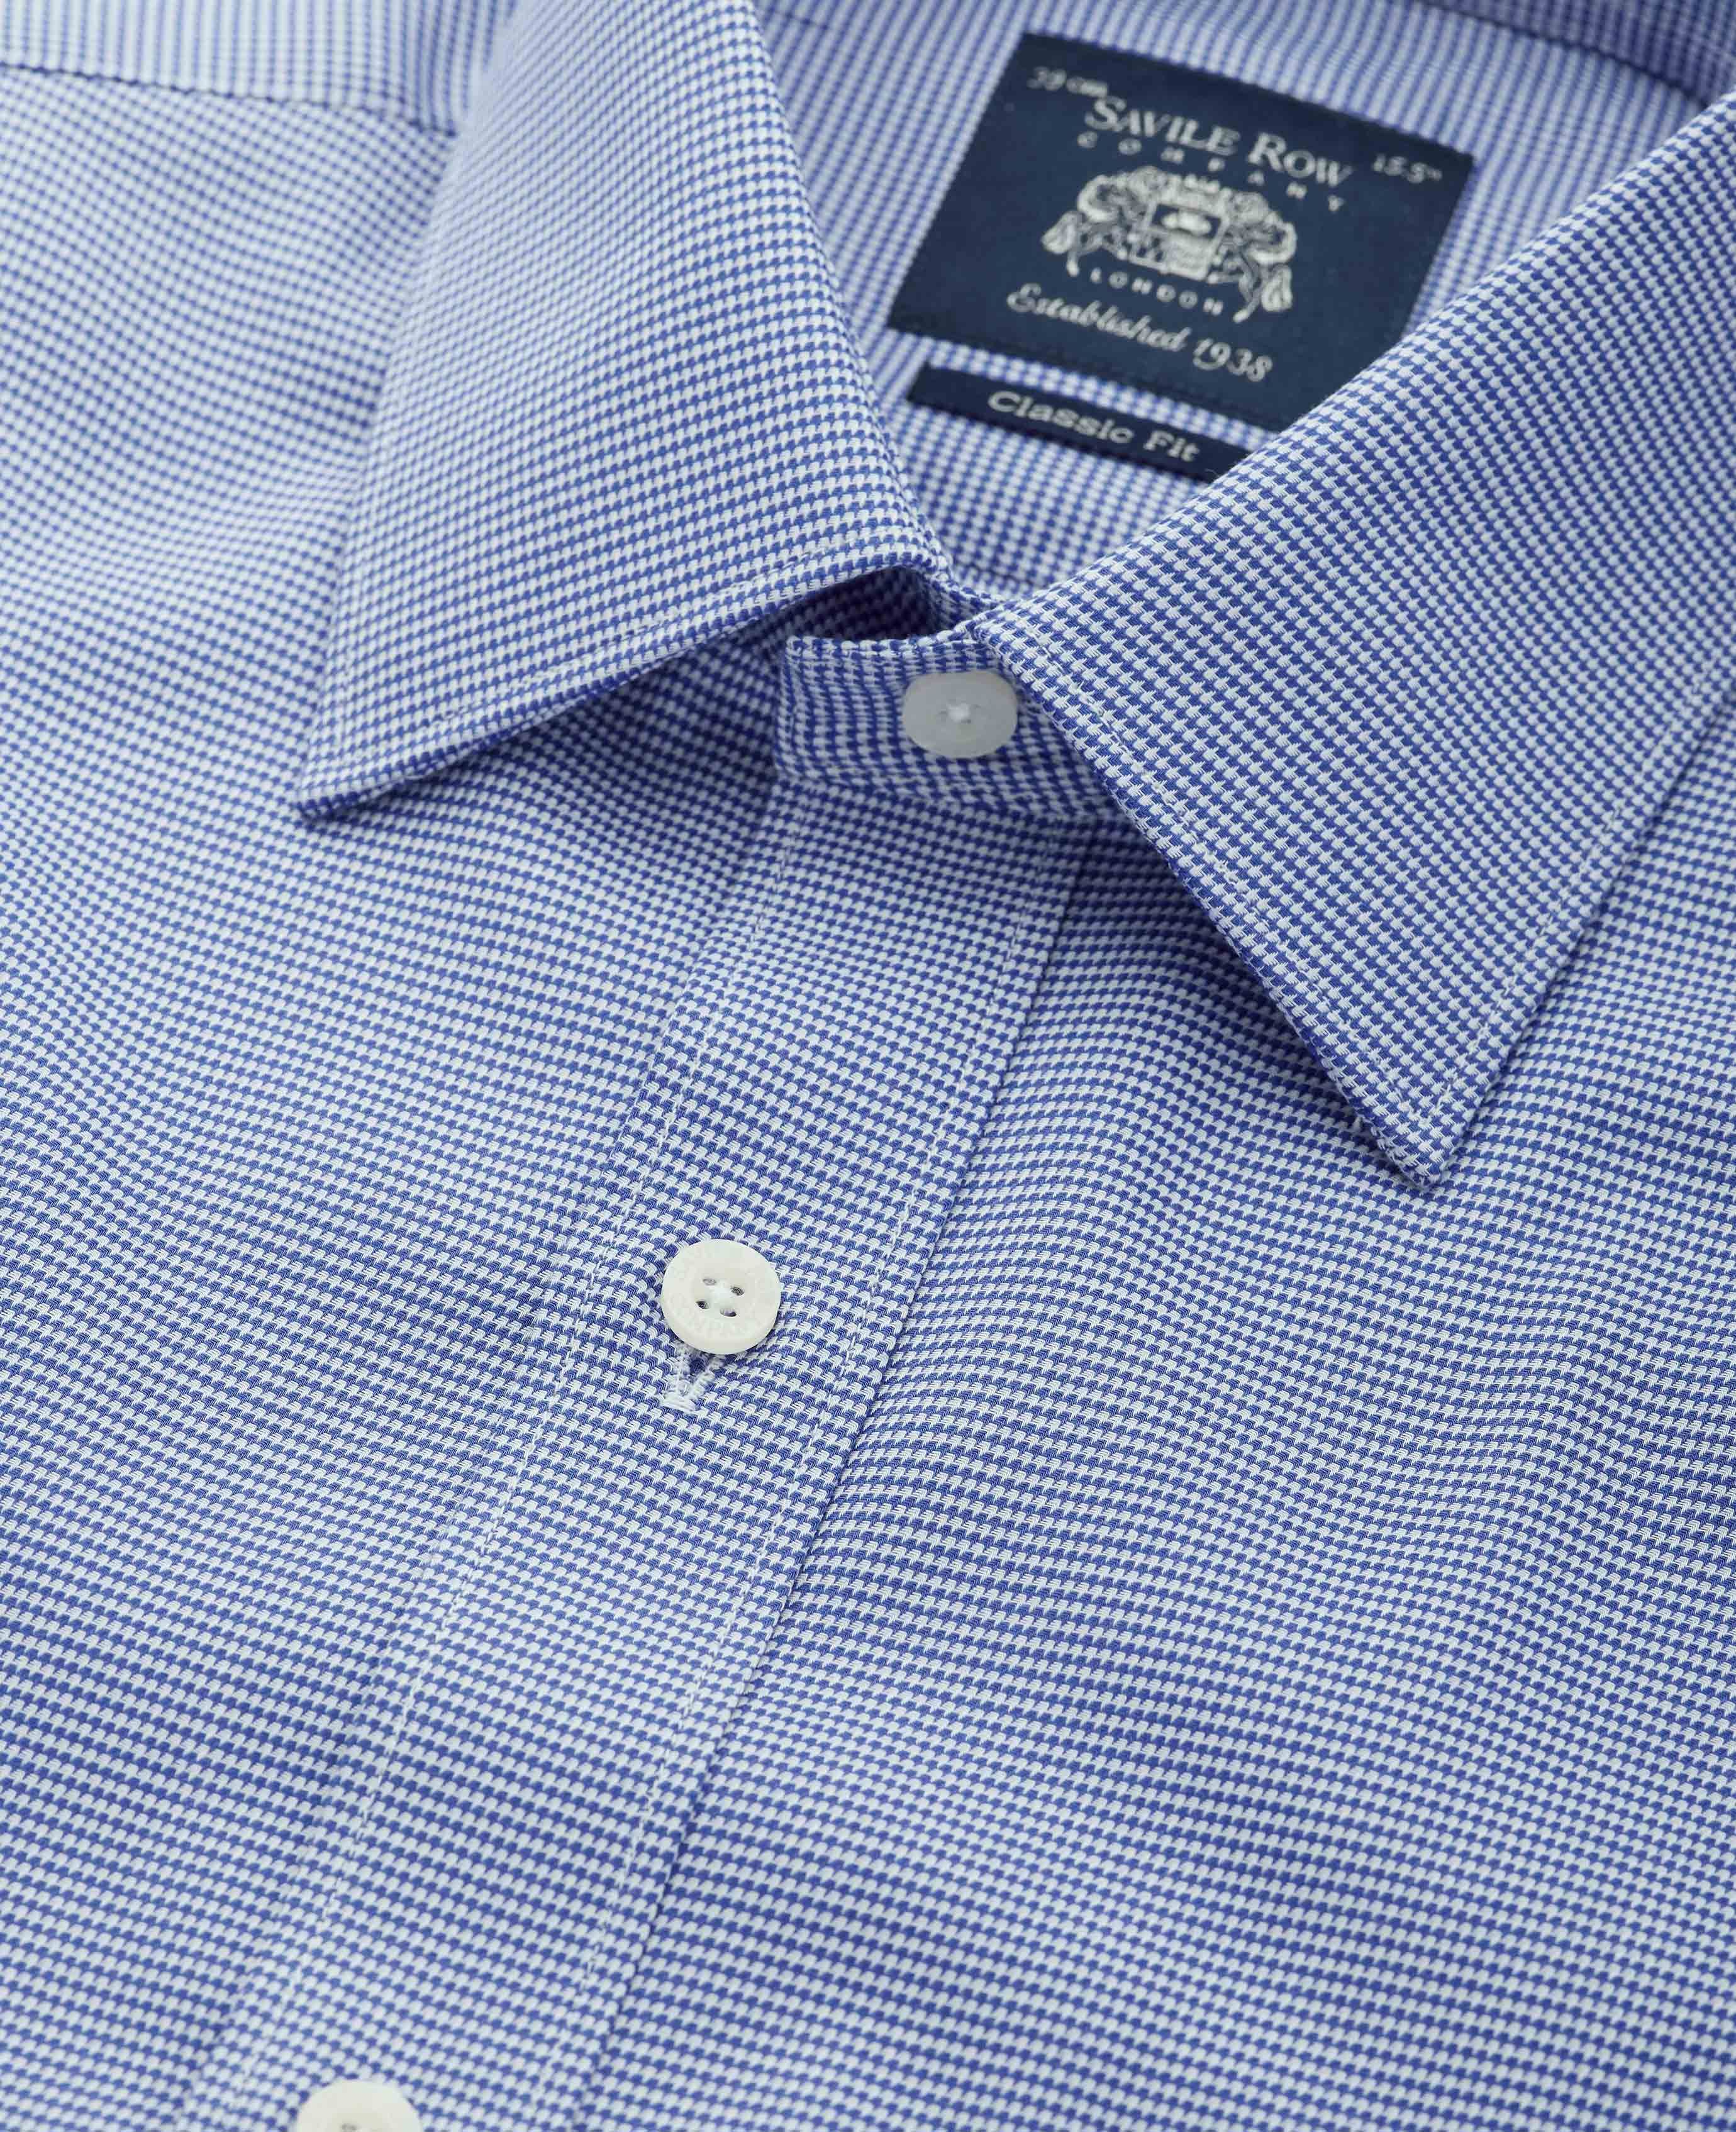 Men’s Classic Fit Puppytooth Single Cuff Shirt in Blue | Savile Row Co